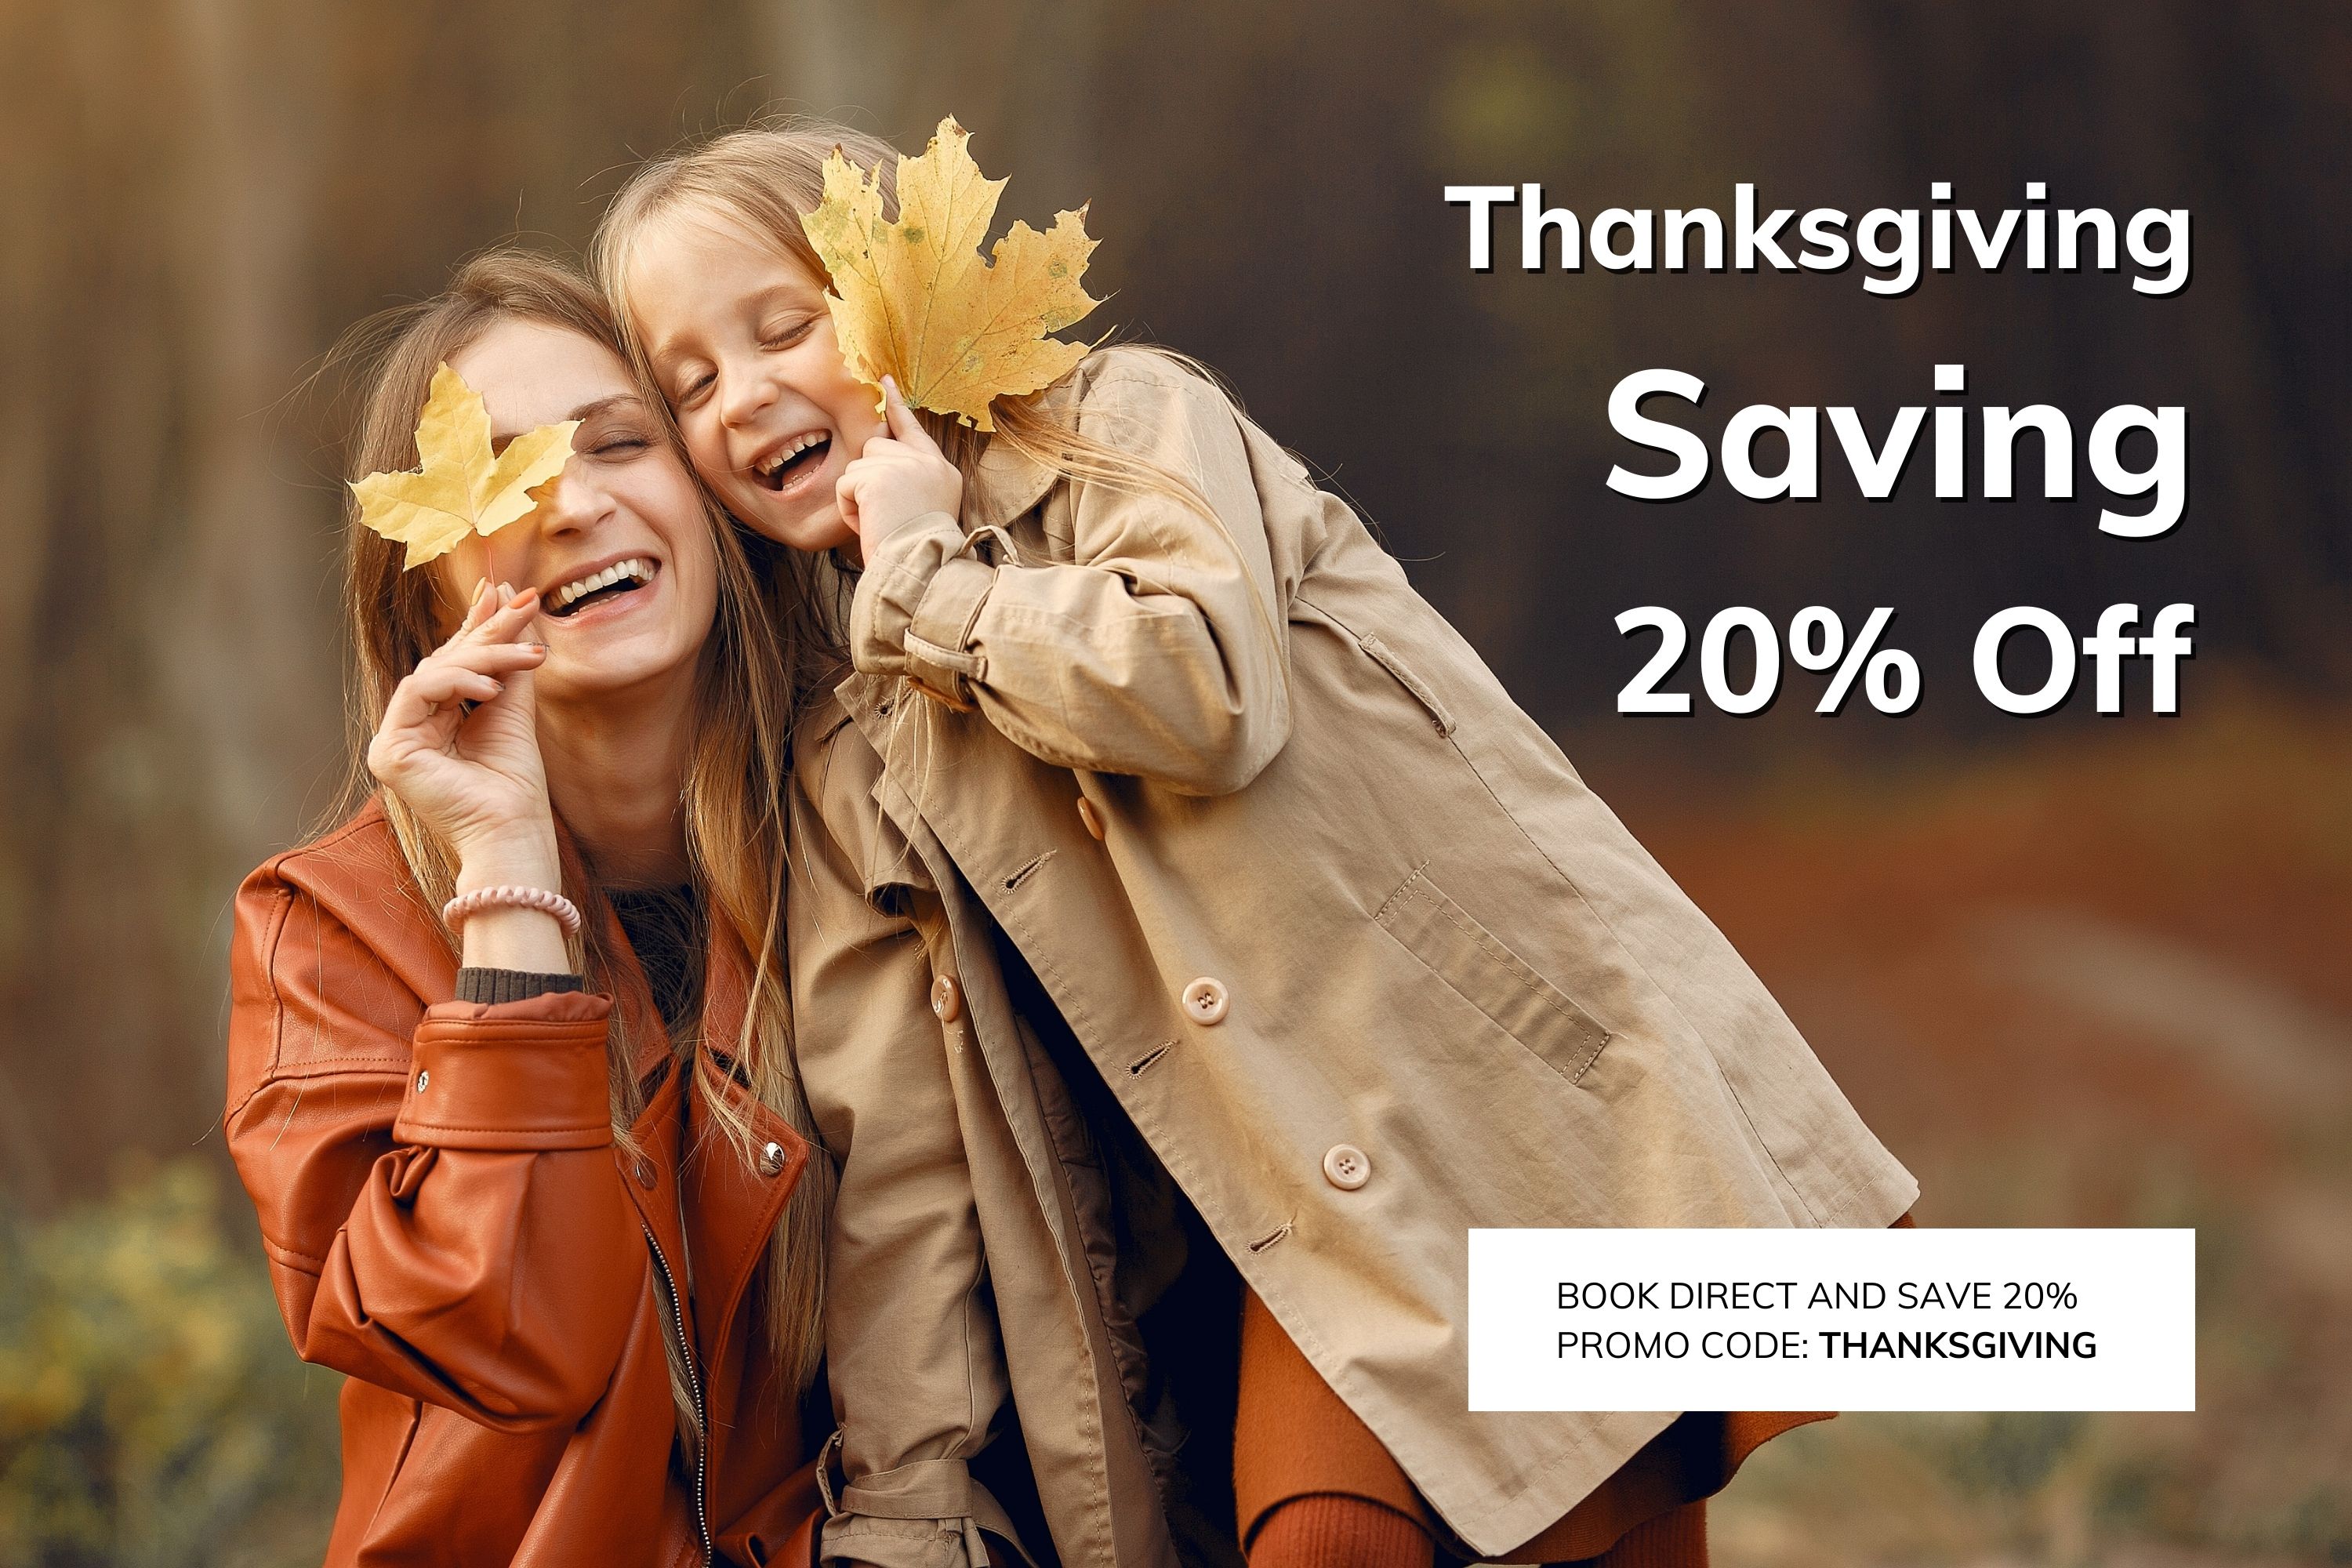 Thanks & Savings: Book Direct for a 20% Thanksgiving Discount at Altara